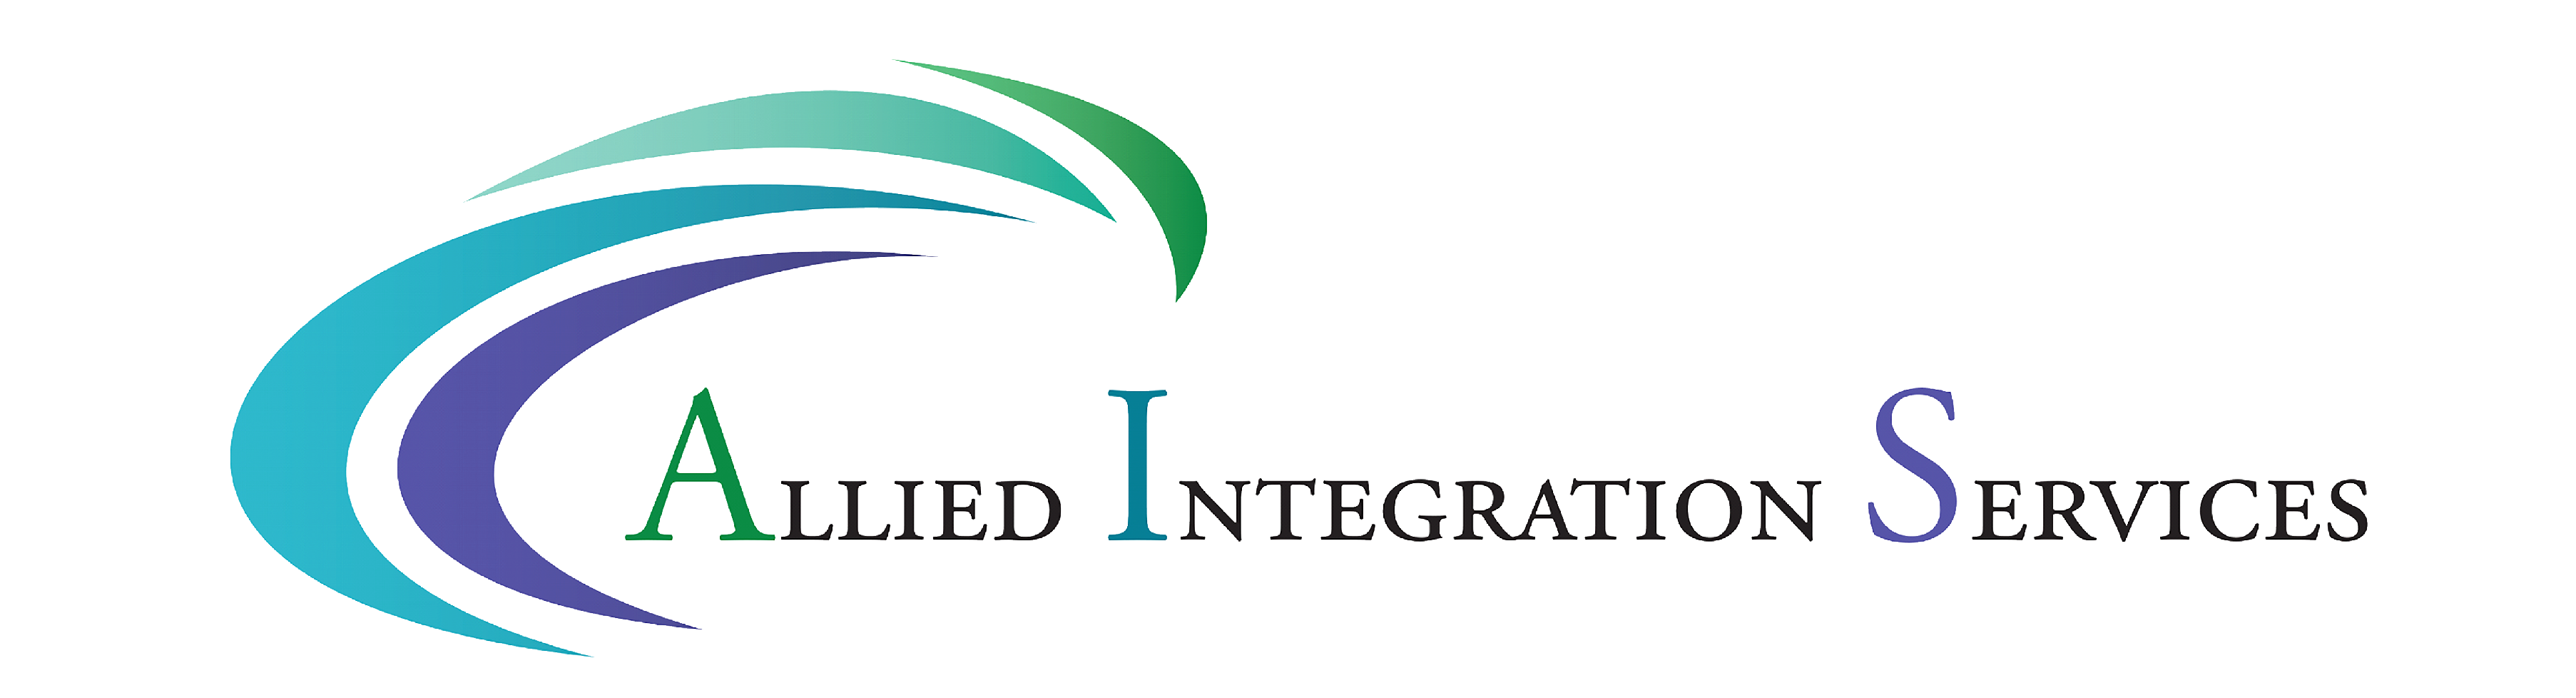 Allied Integration Services